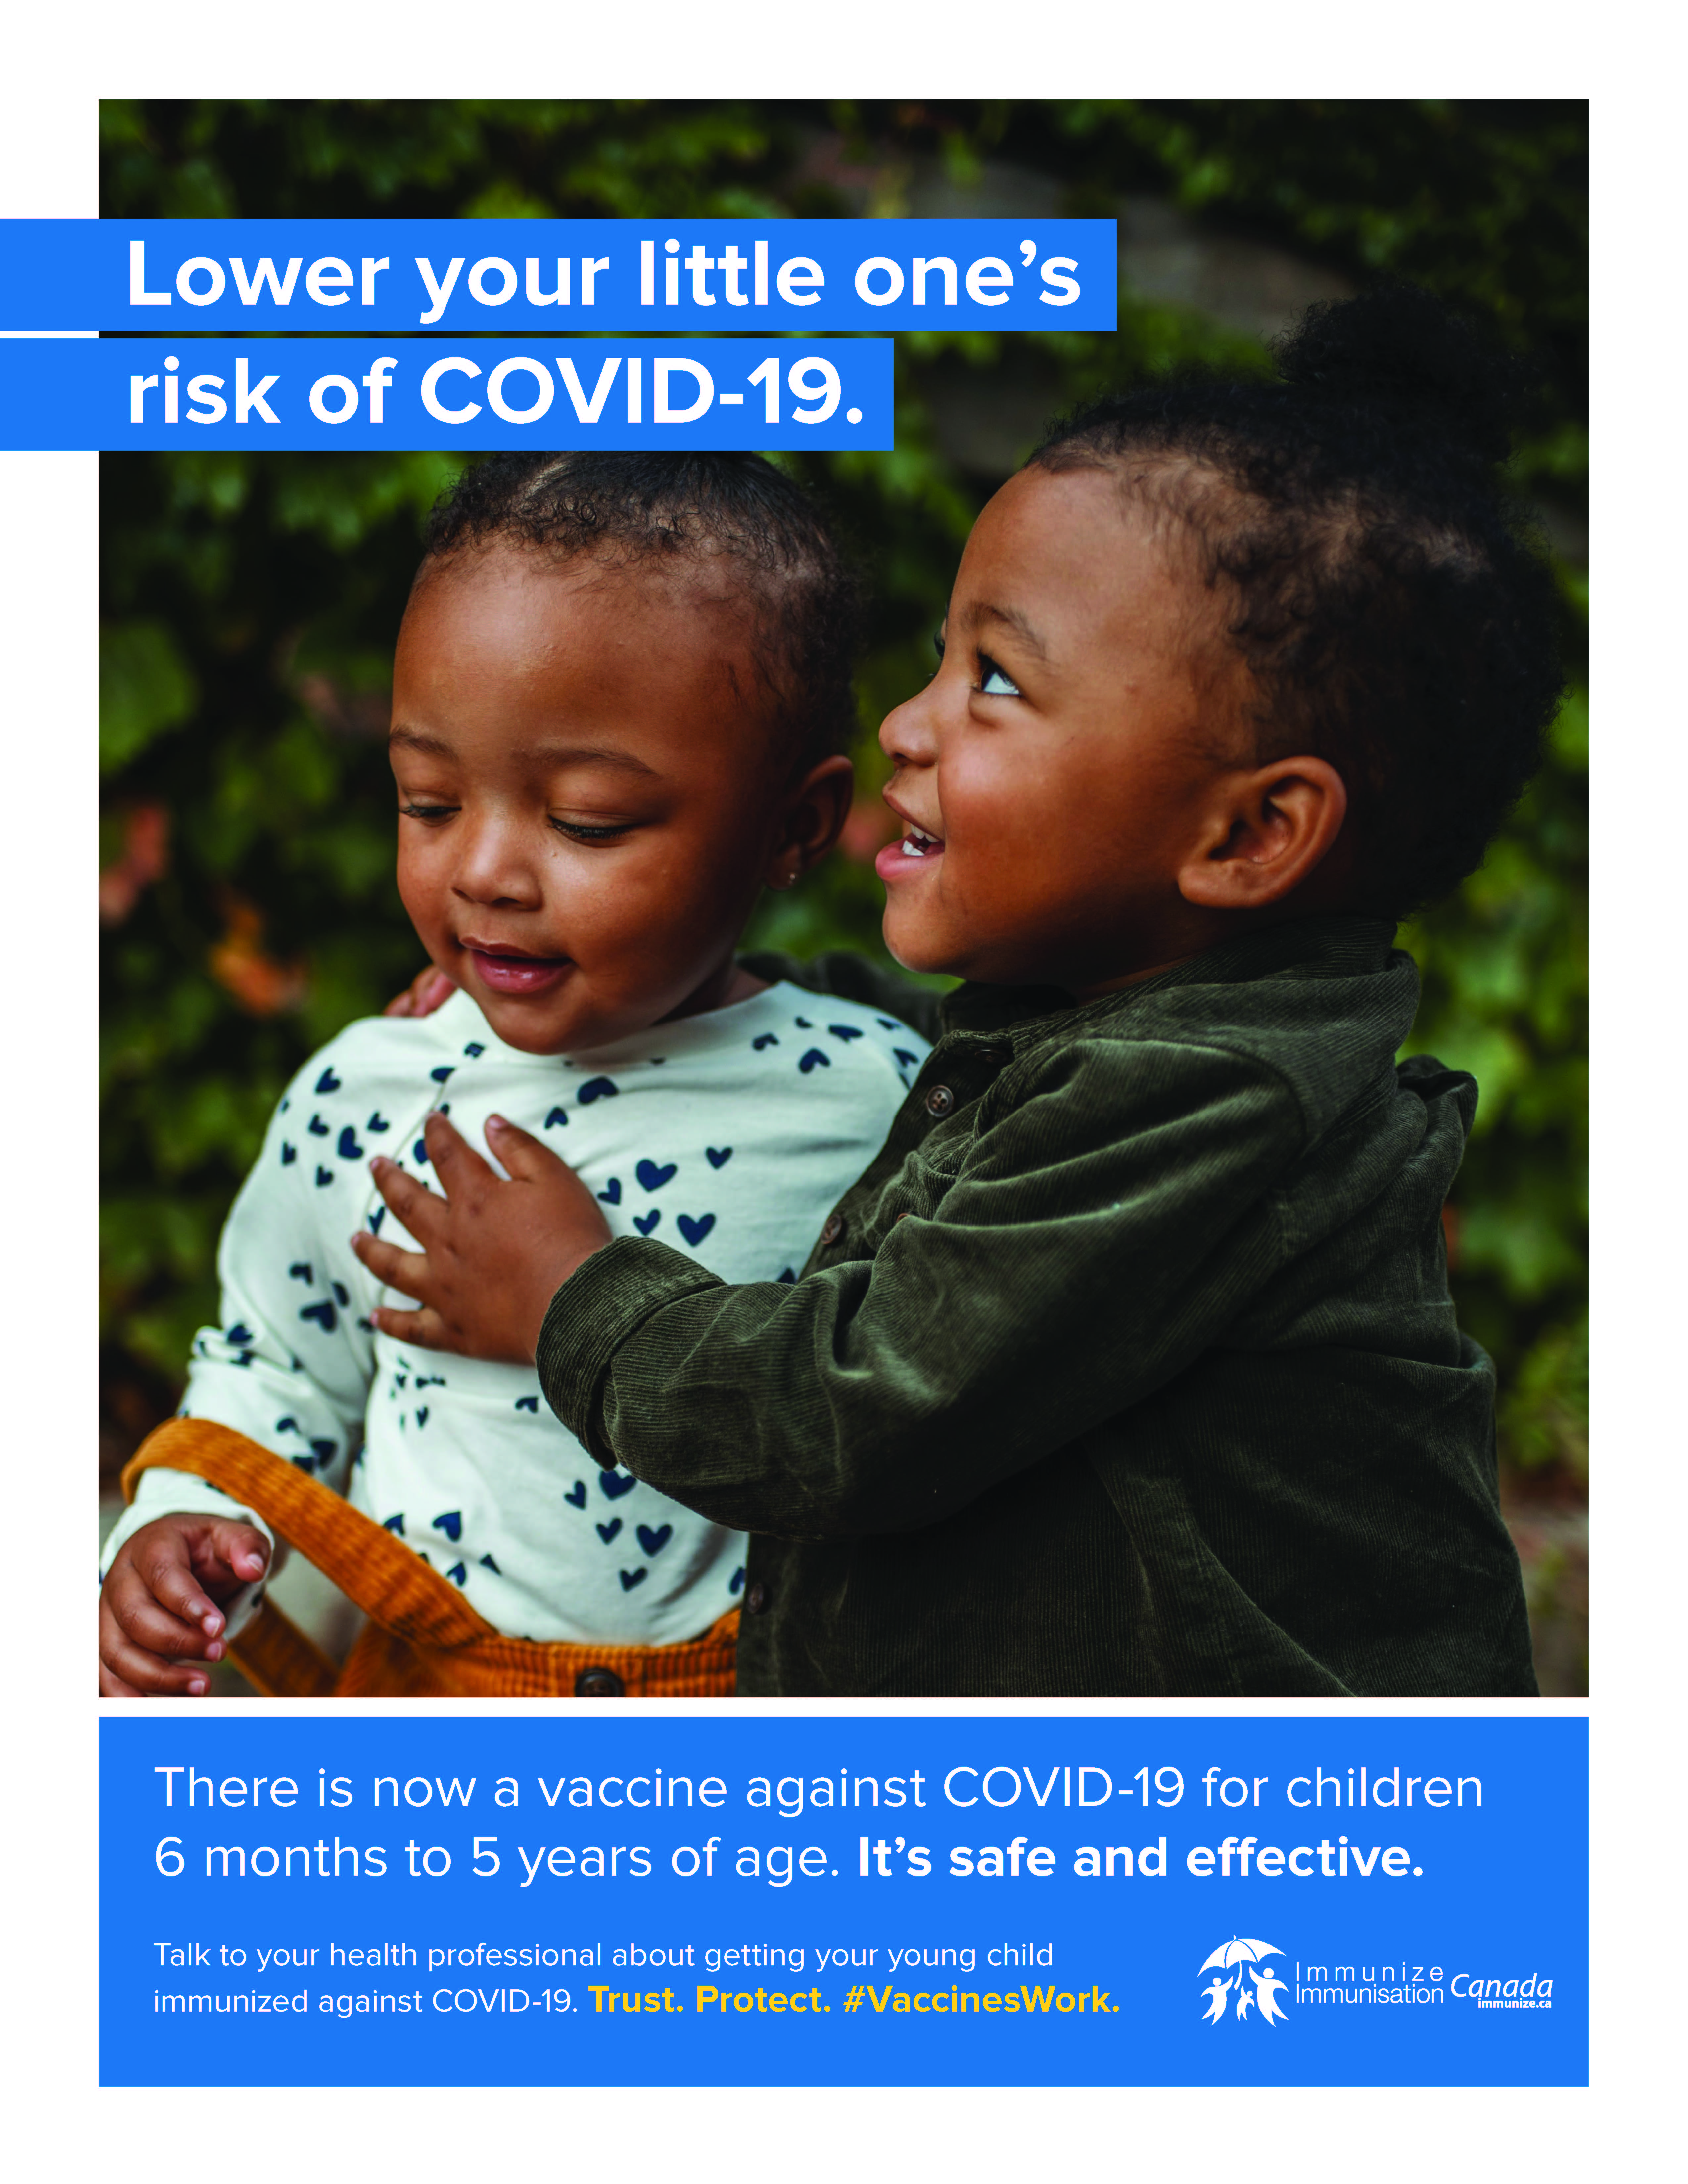 Lower your little one's risk of COVID-19 (poster 2)